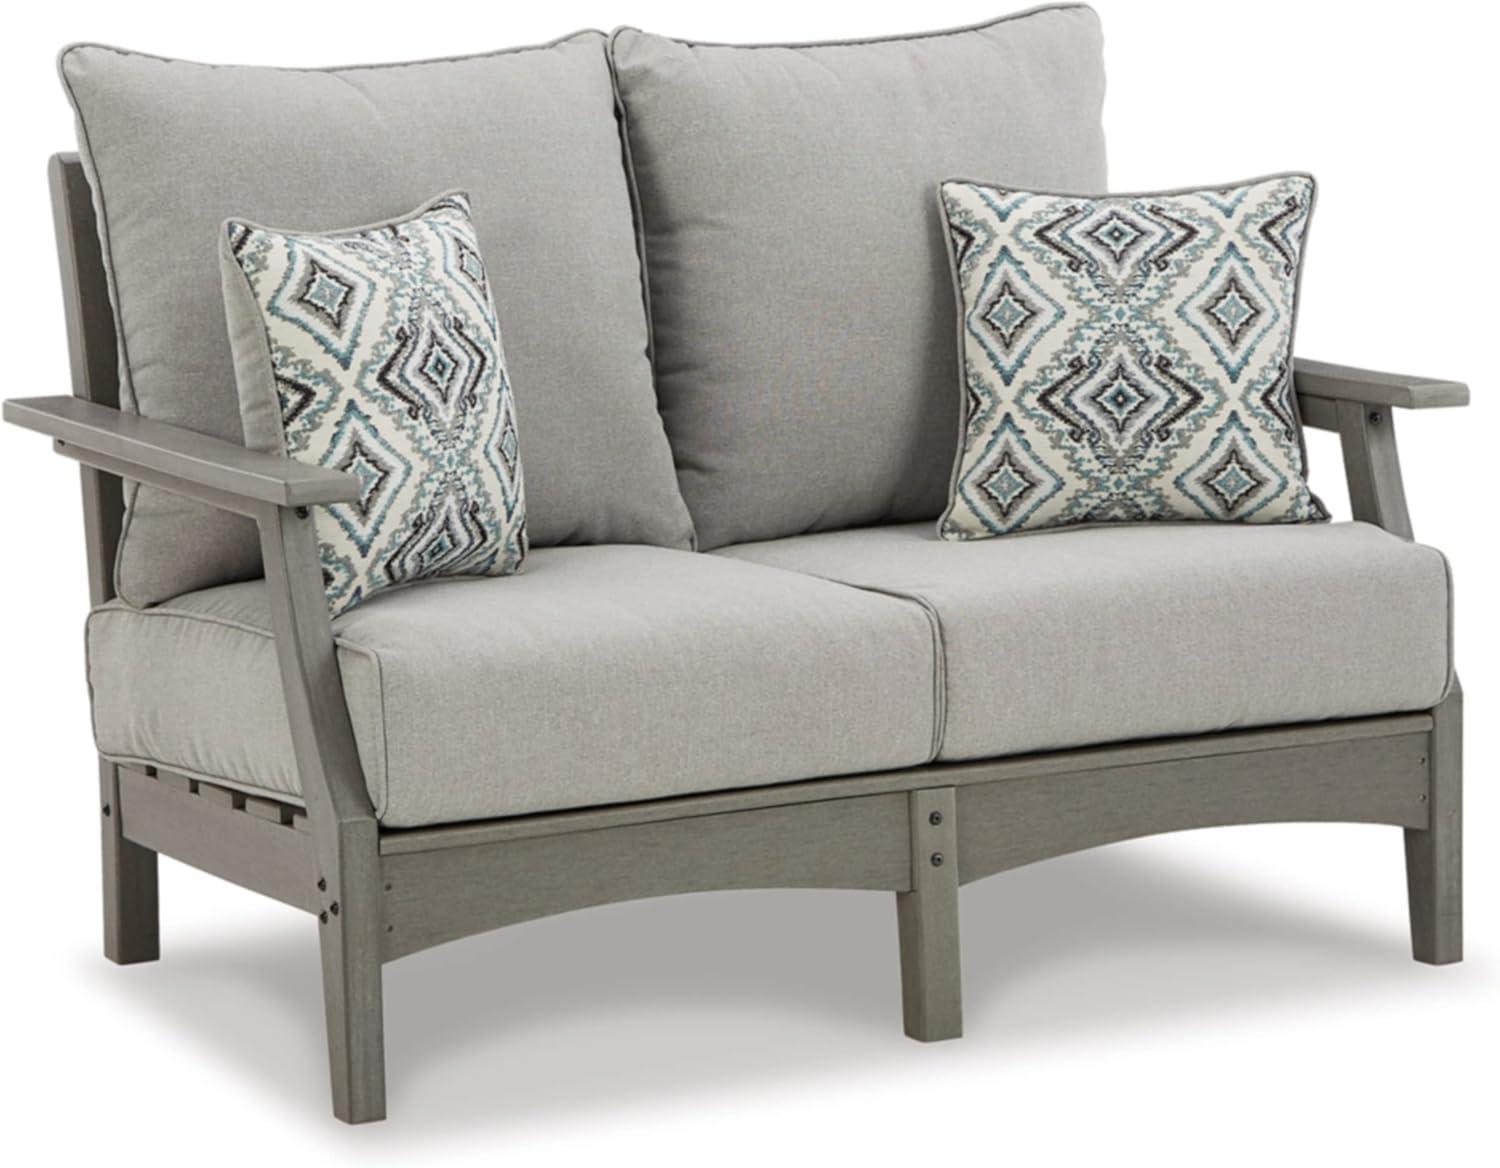 Transitional Gray 54" Stationary Outdoor Loveseat with Cushions